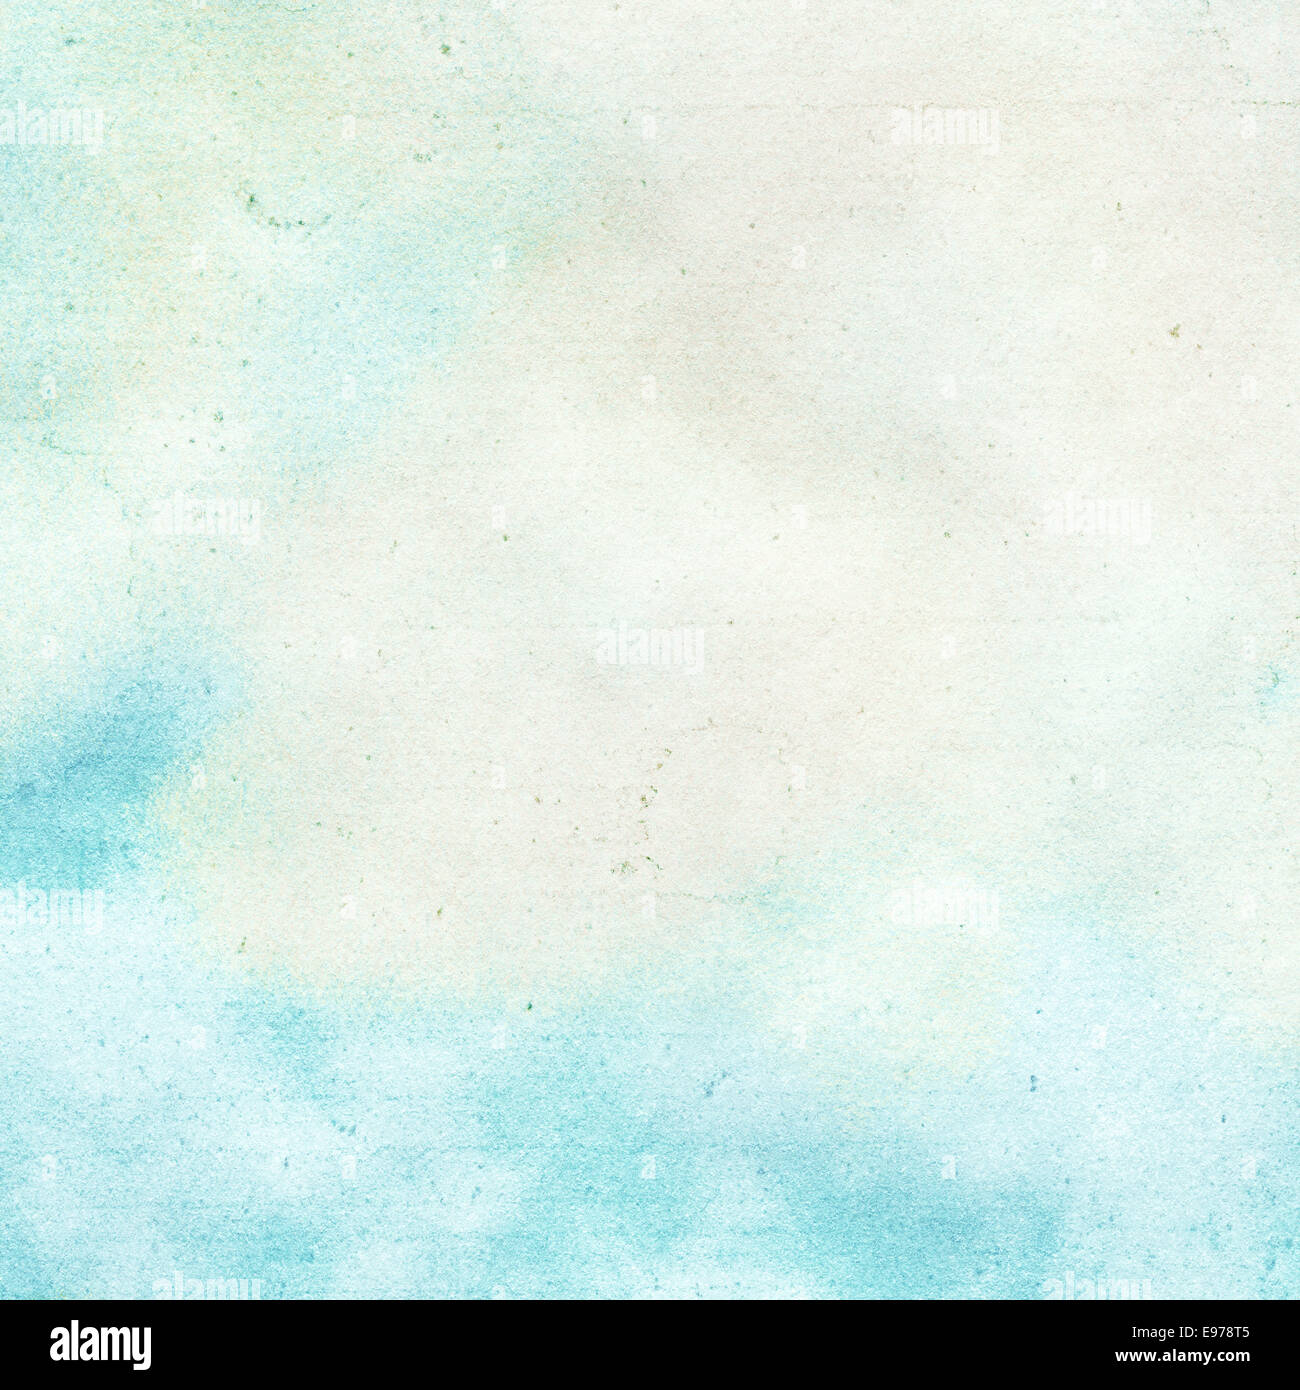 Abstract cloud,sky watercolor background. Stock Photo